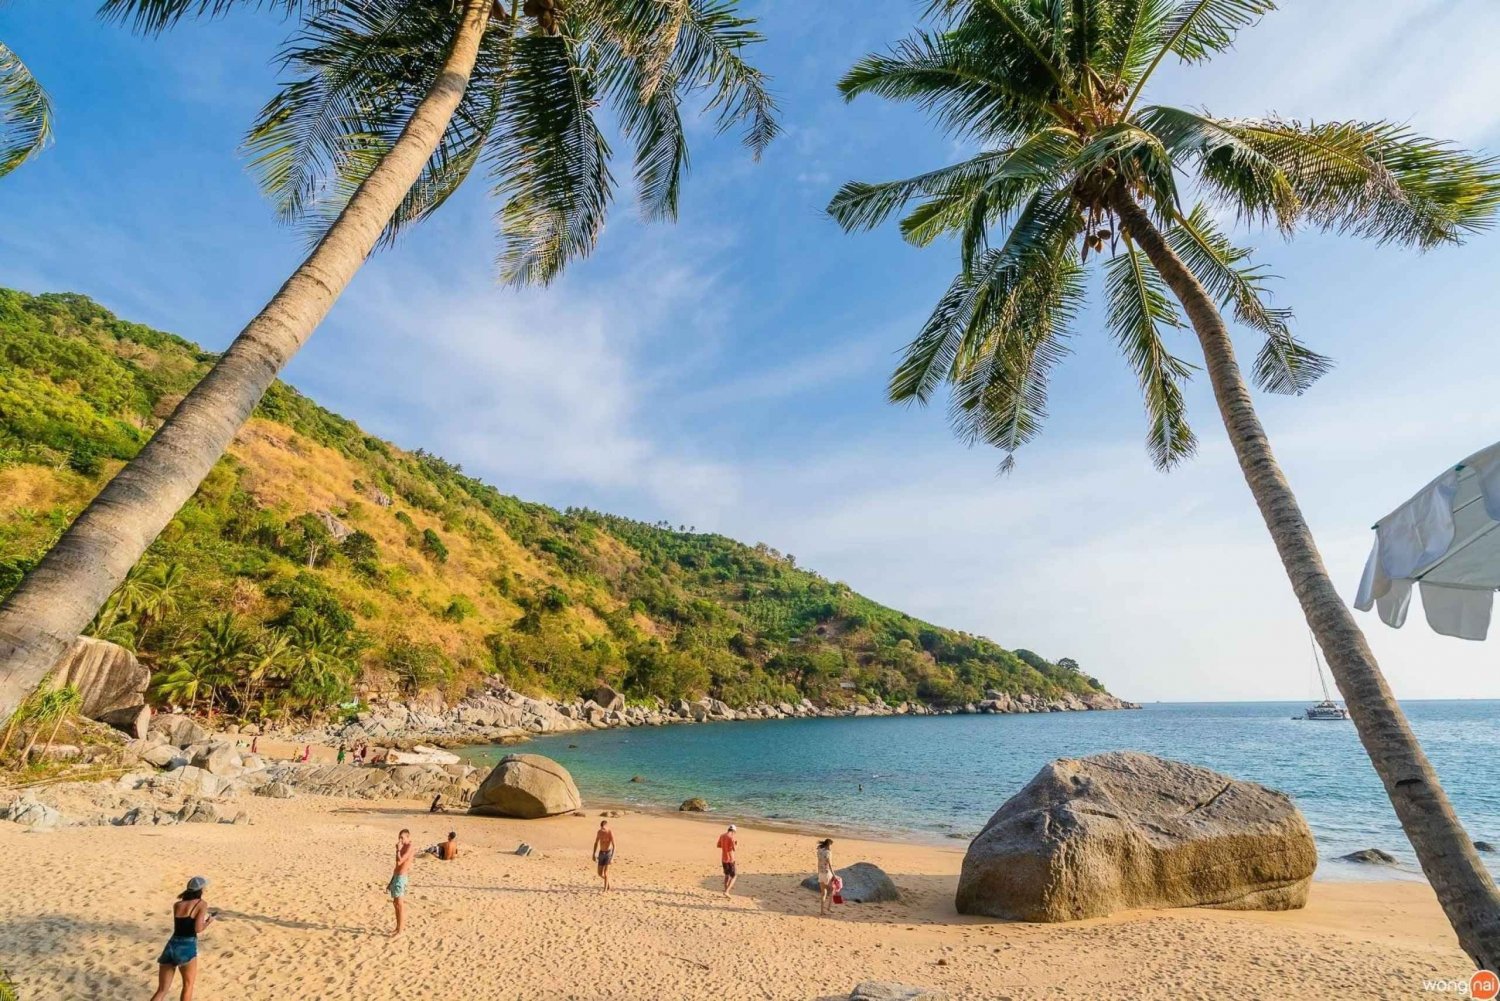 Patong Beach: Visit 9 Famous Islands in Phuket by Jet Ski